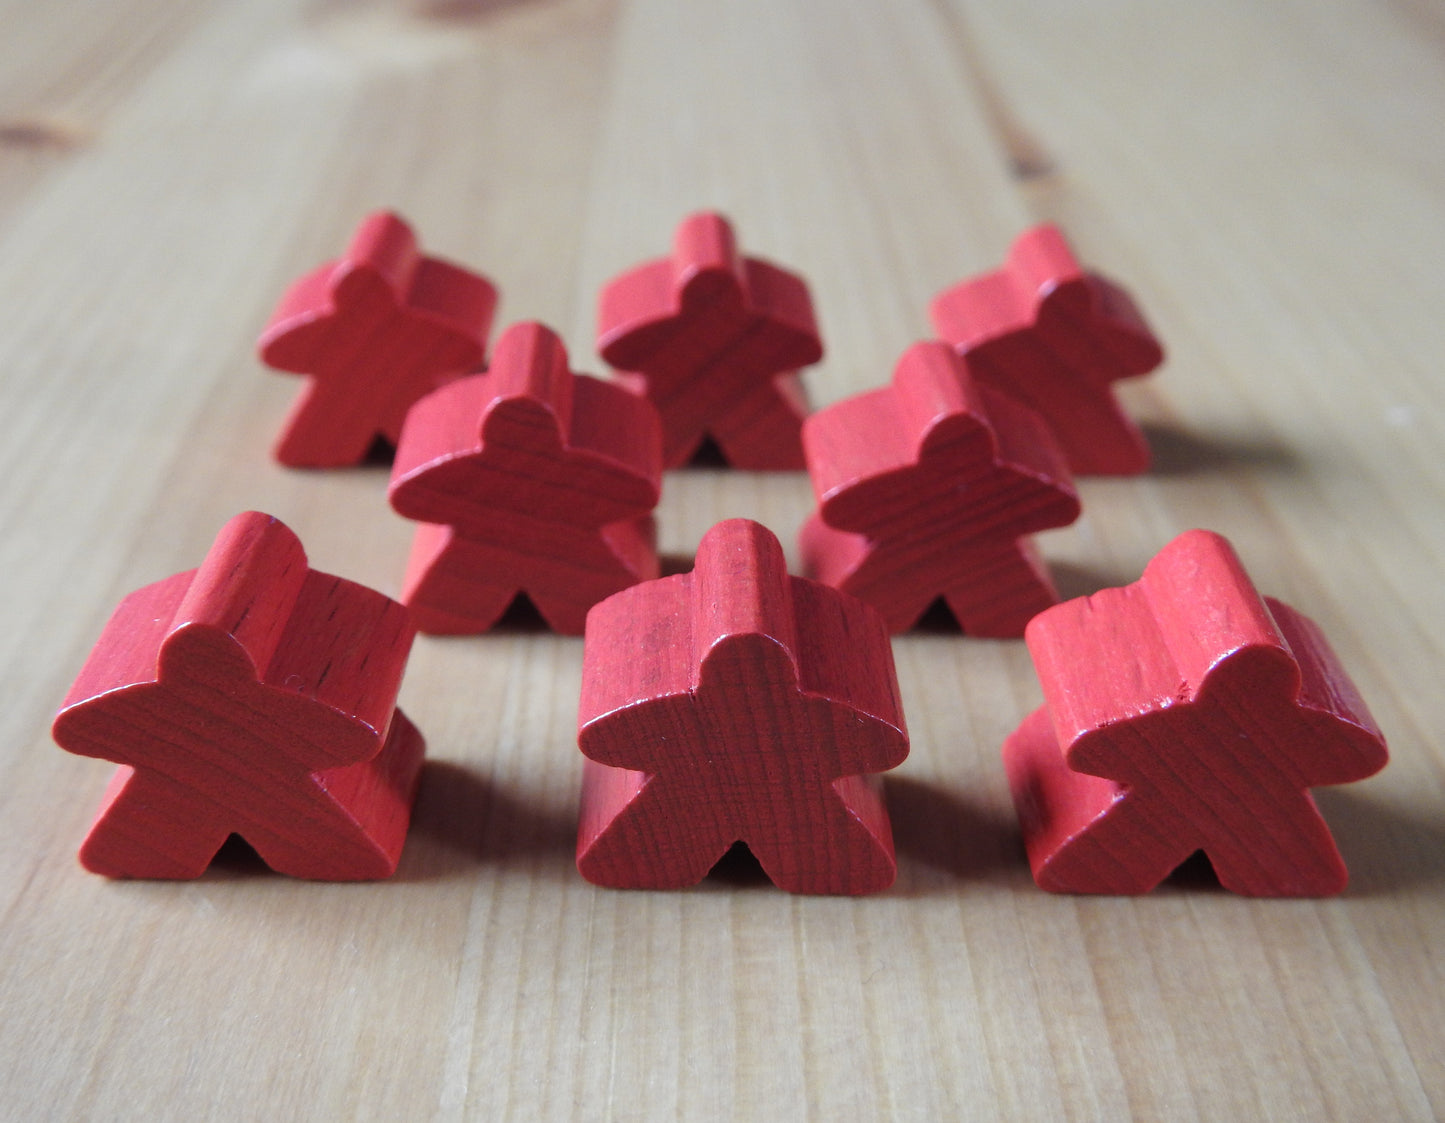 Close-up view of the red set of 8 meeples.